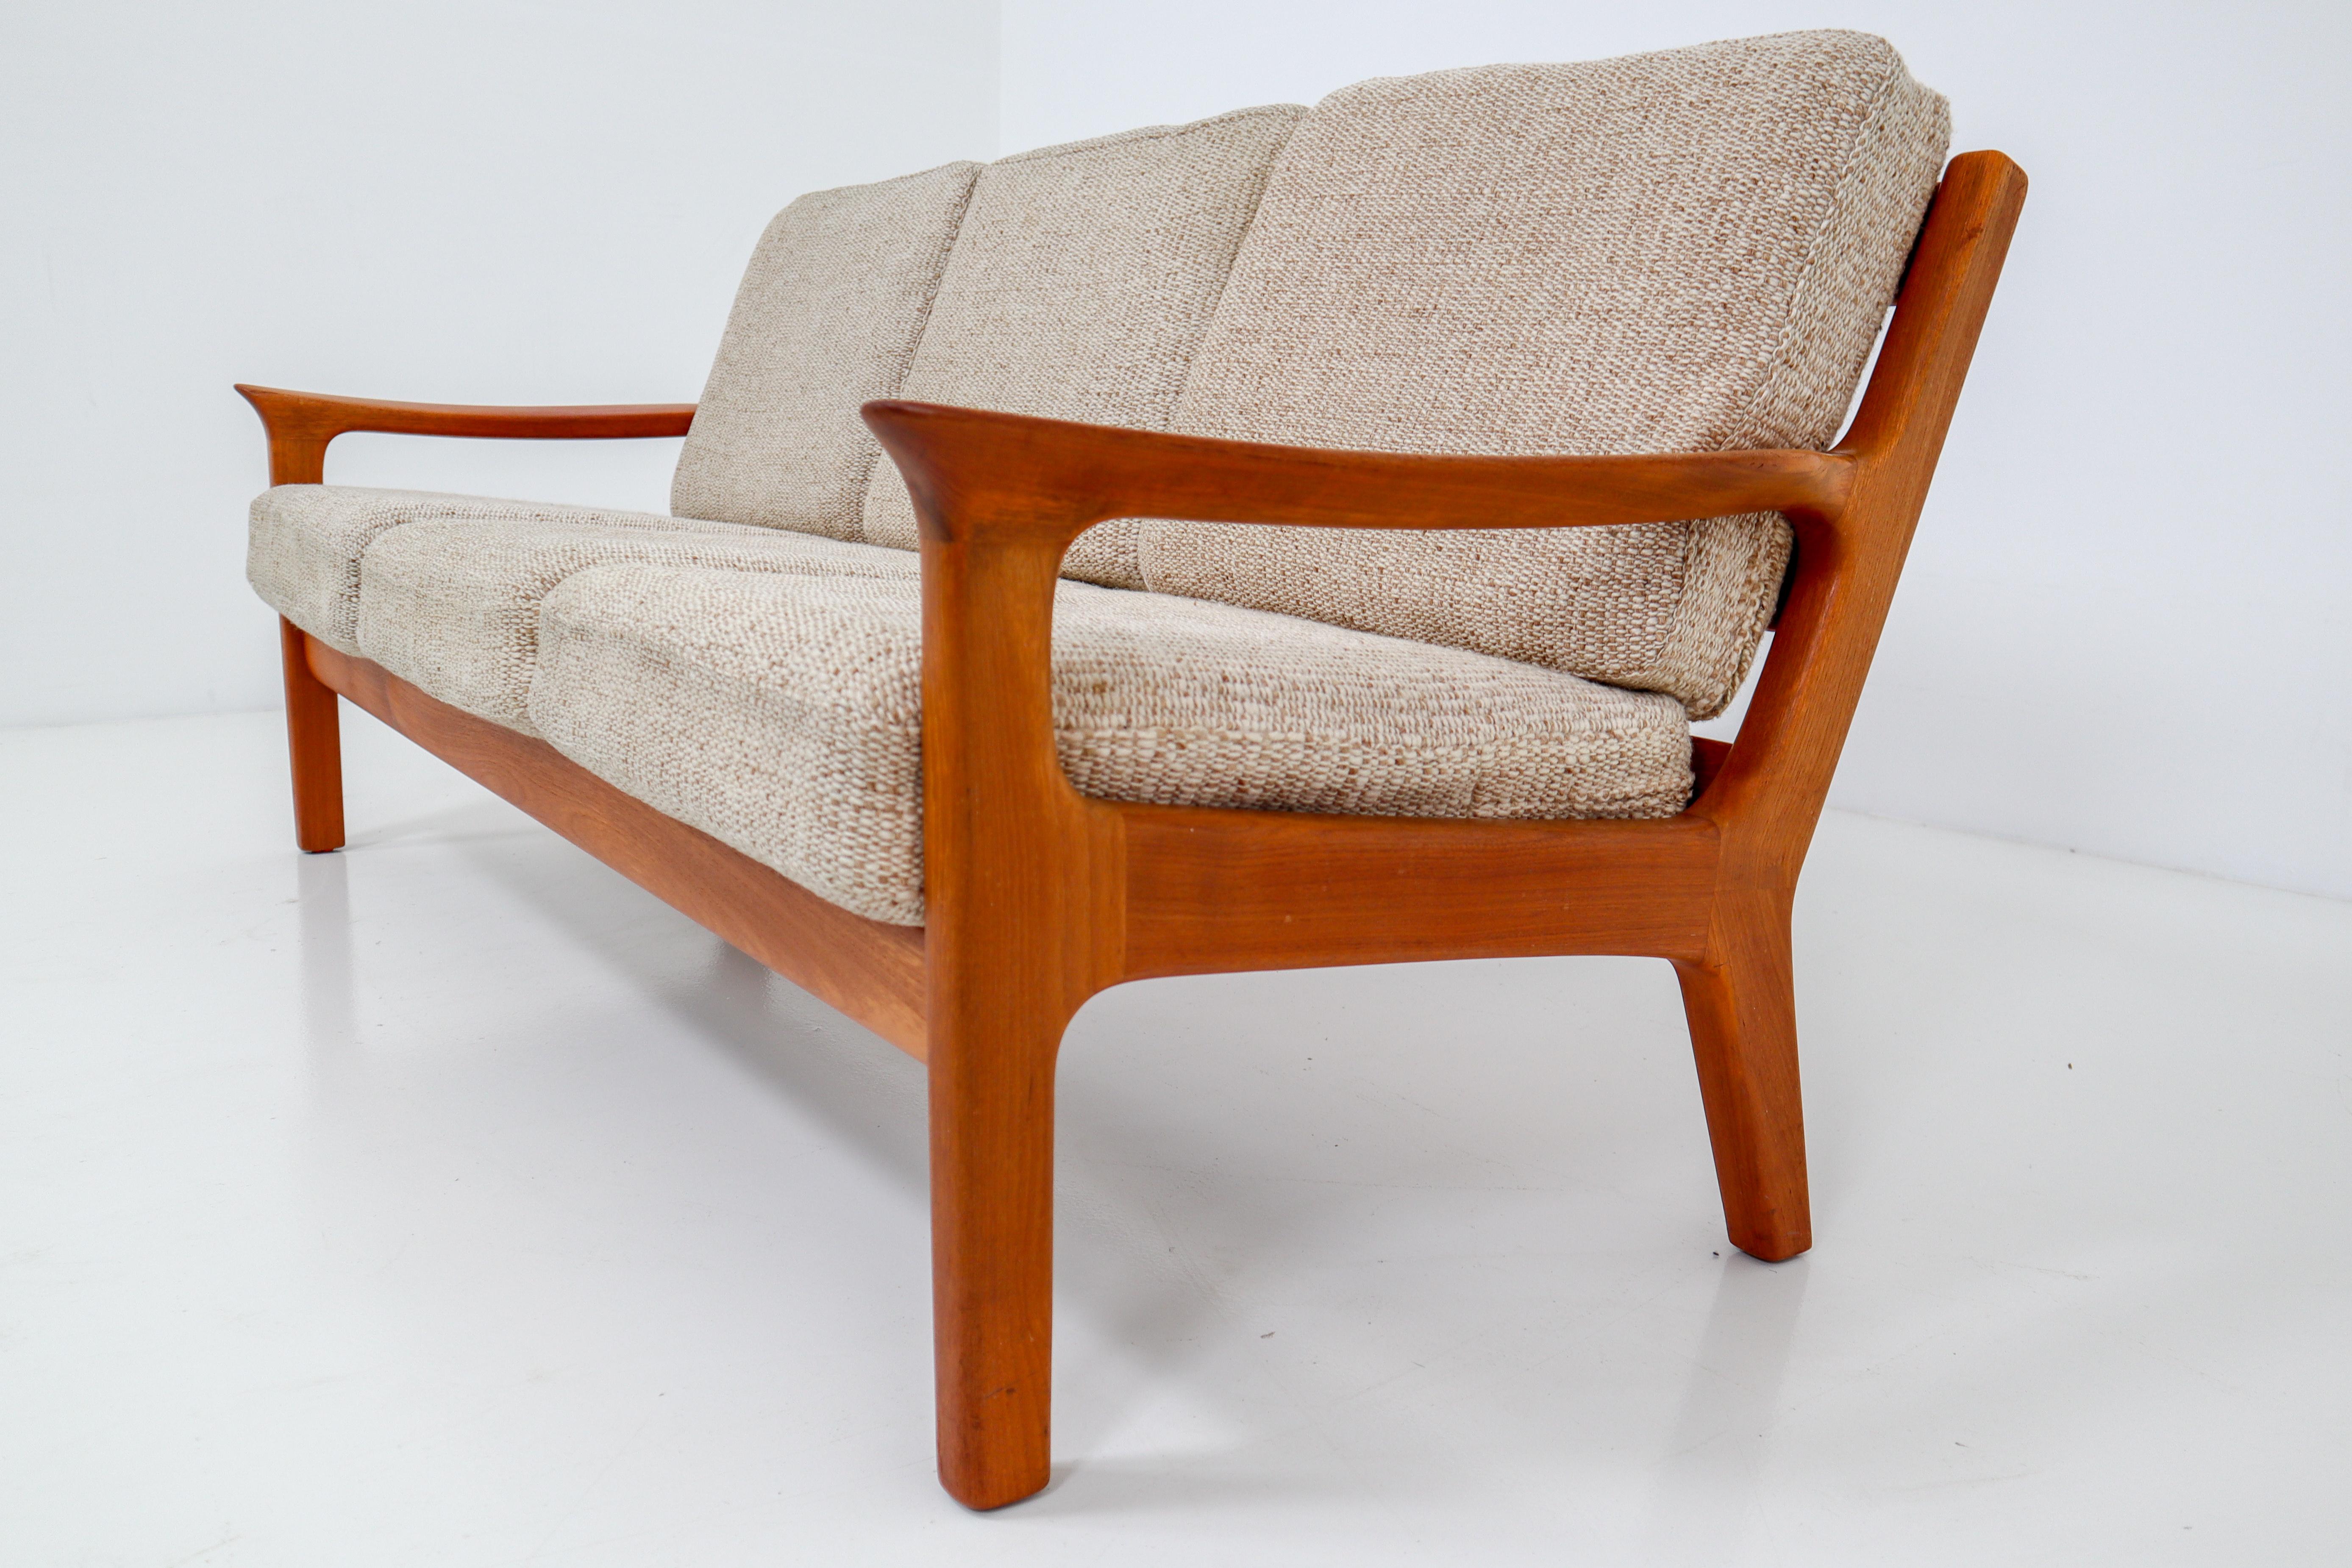 Three-seat sofa in solid teak and cushions designed by the Danish designer Juul Kristensen and manufactured by Glostrup Furniture Factory in the 1960s. The cushions are upholstered with a sandy colored high quality original fabric. The teak wooden